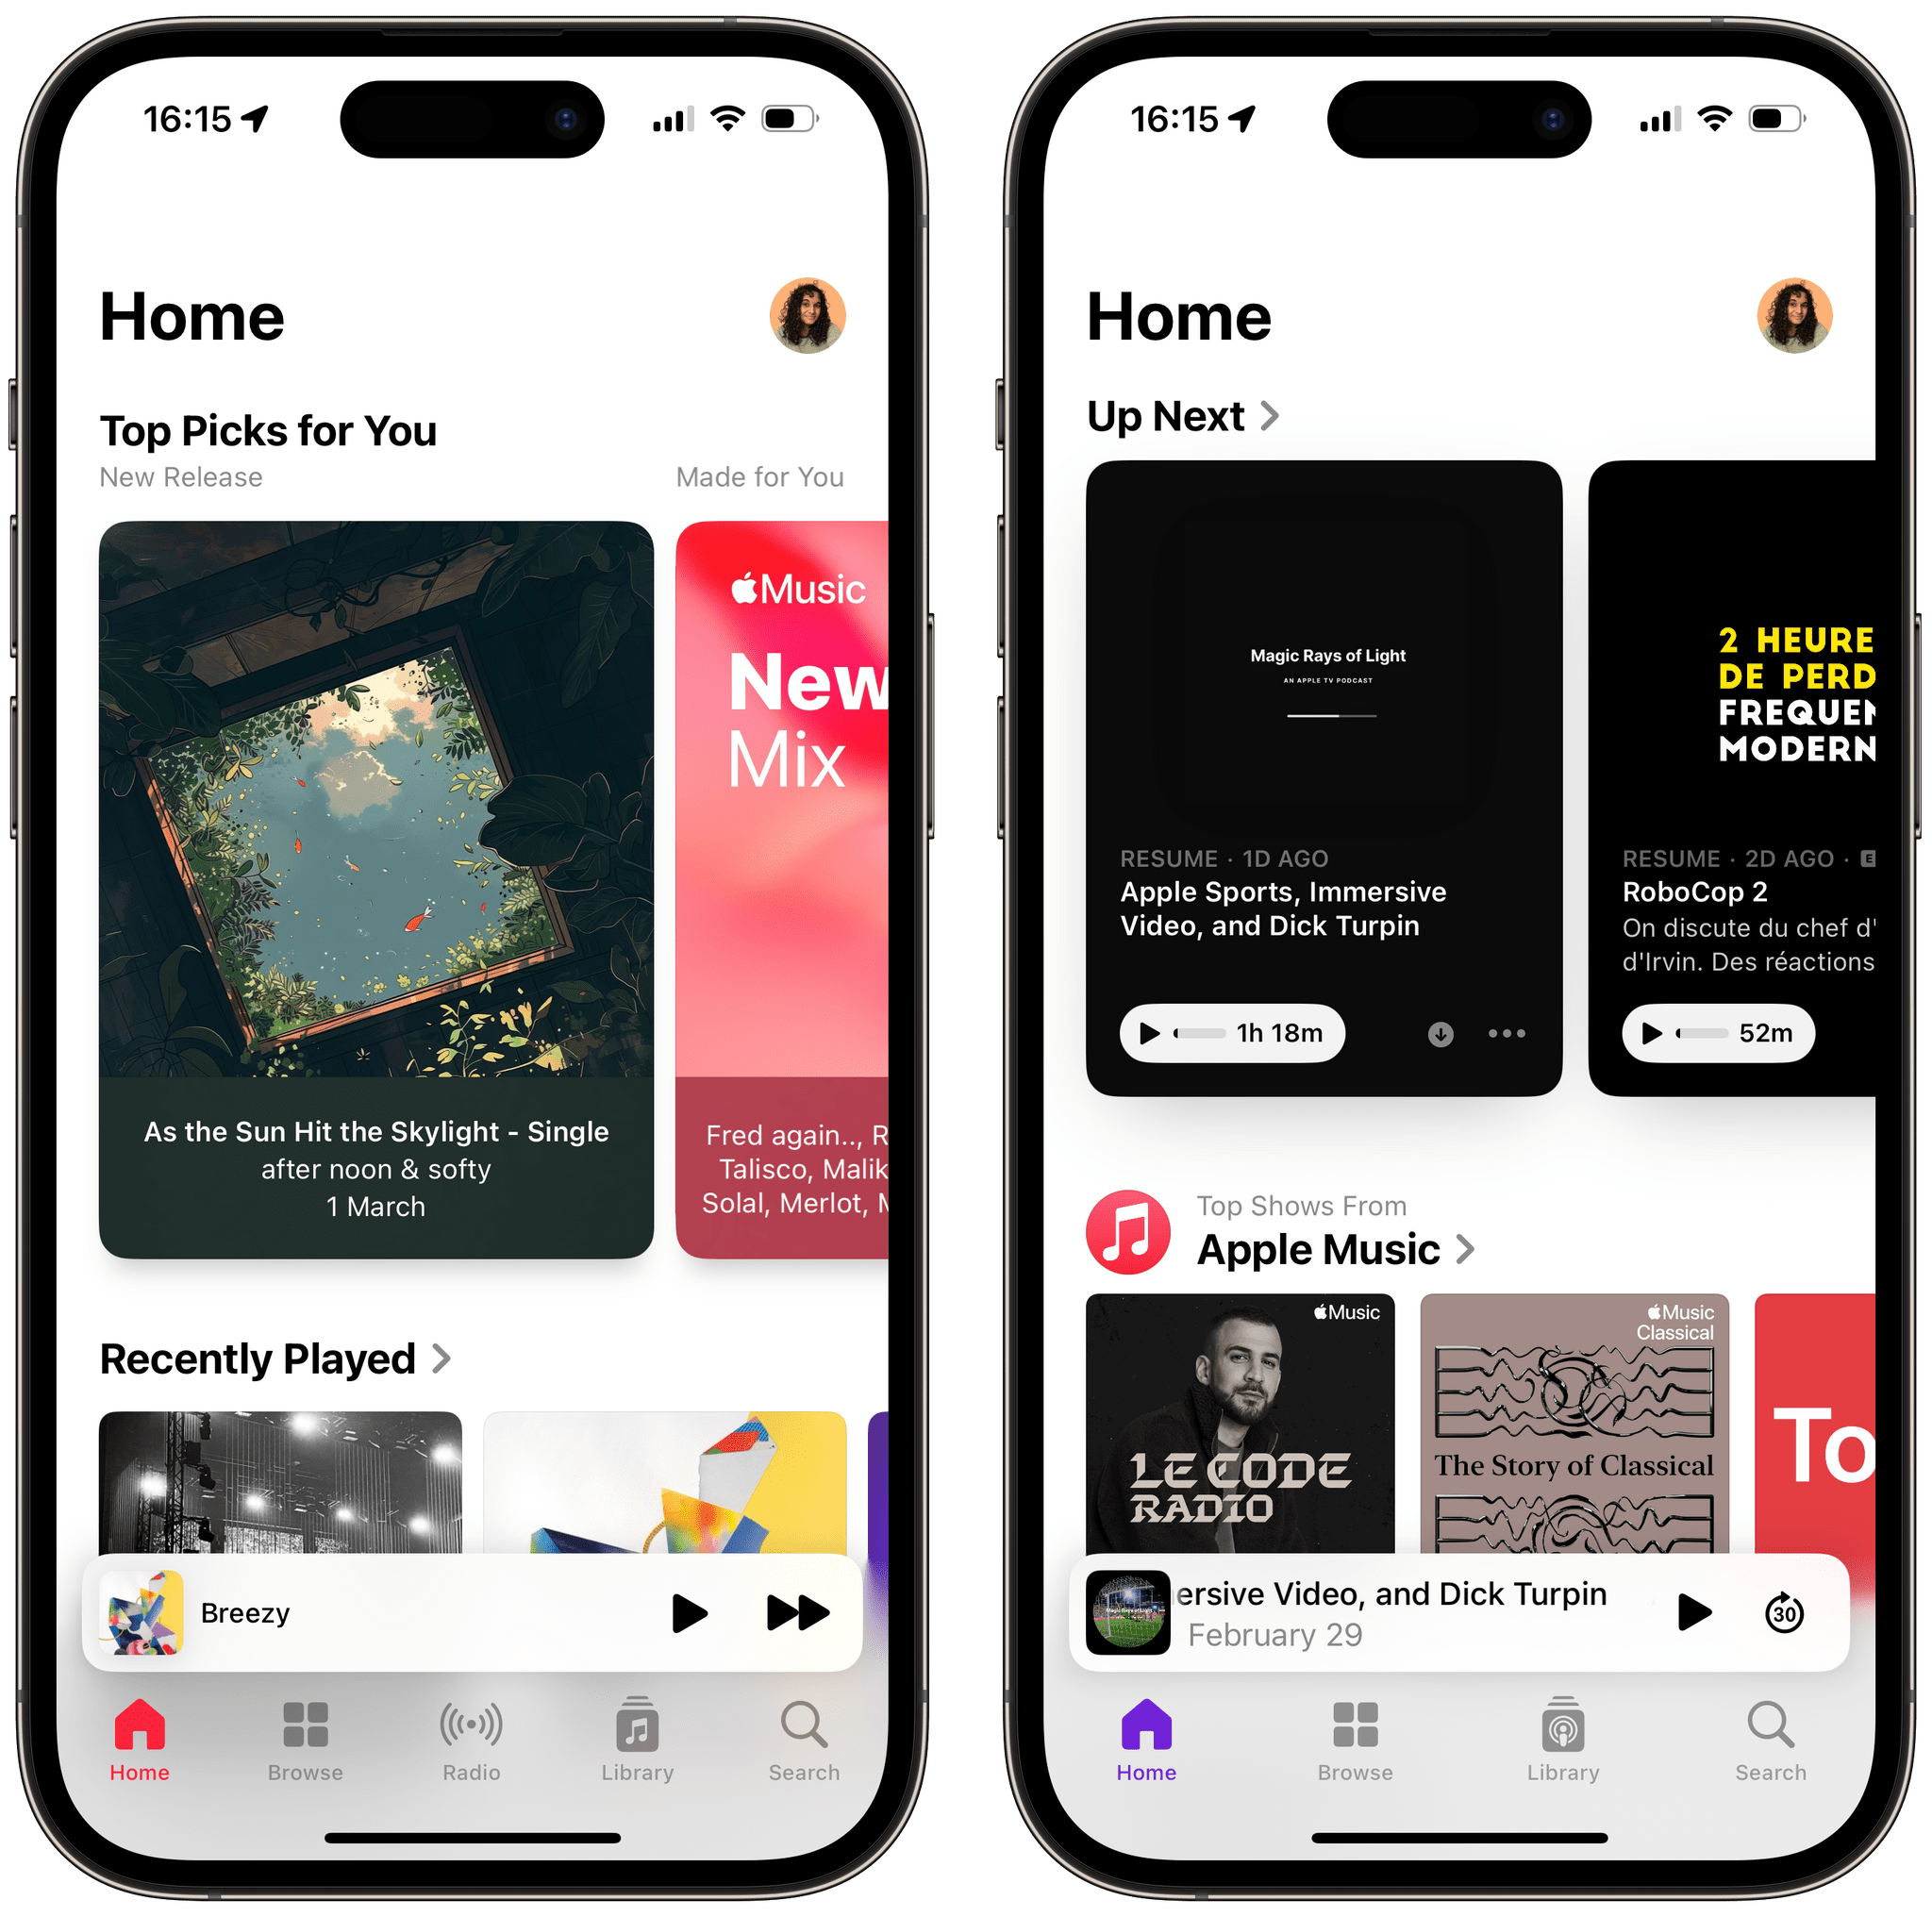 The Podcasts app's bottom toolbar now also features the floating player design previously only found in the Music app.